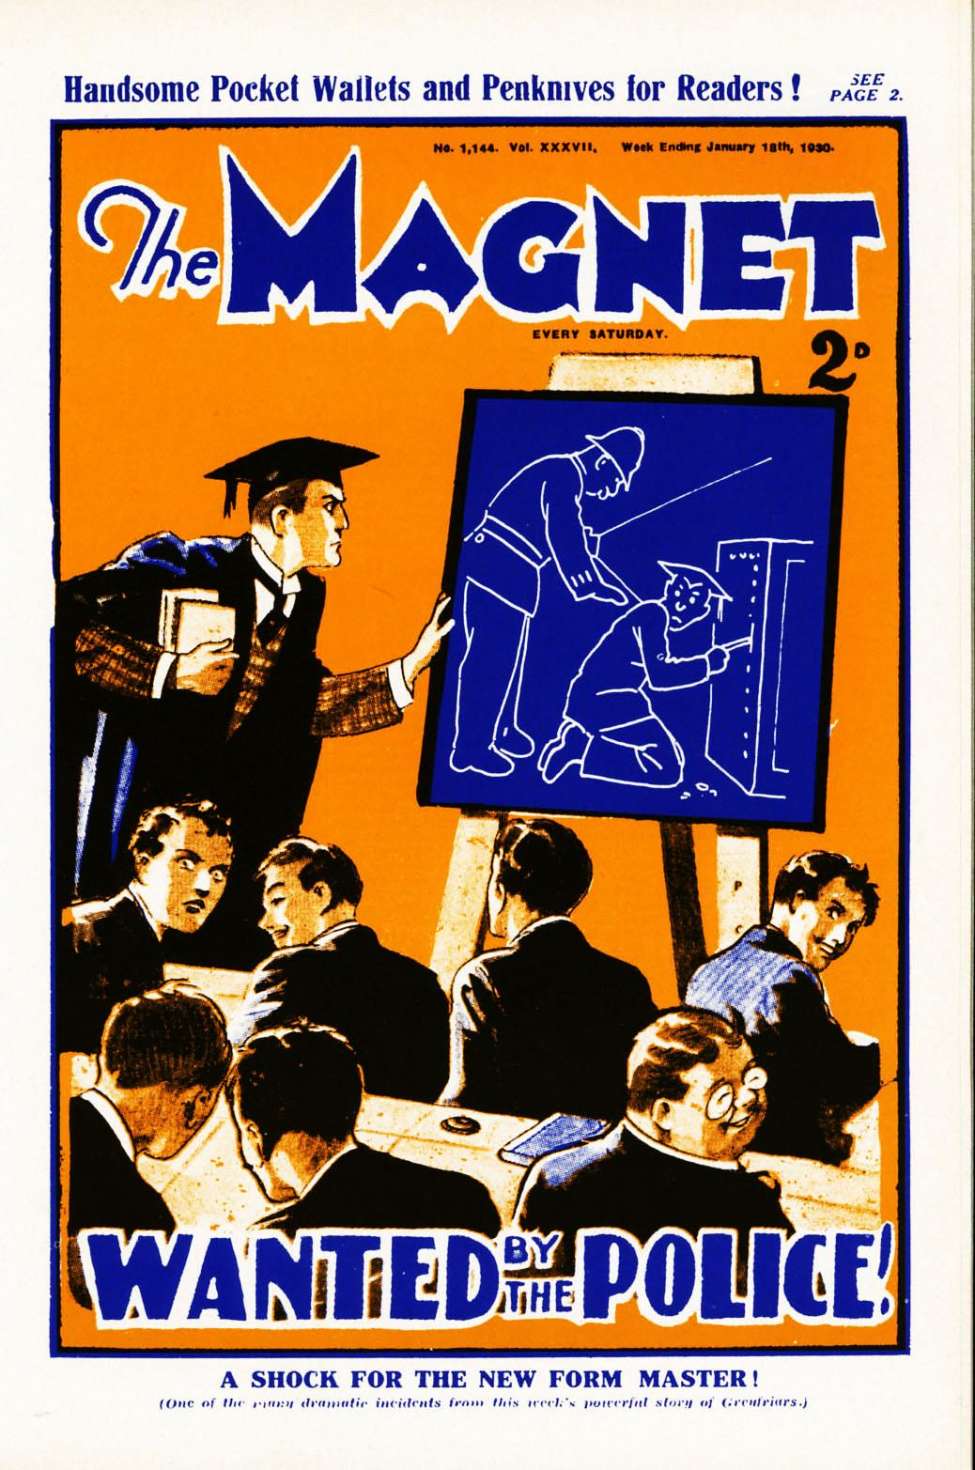 Book Cover For The Magnet 1144 - Wanted by the Police!